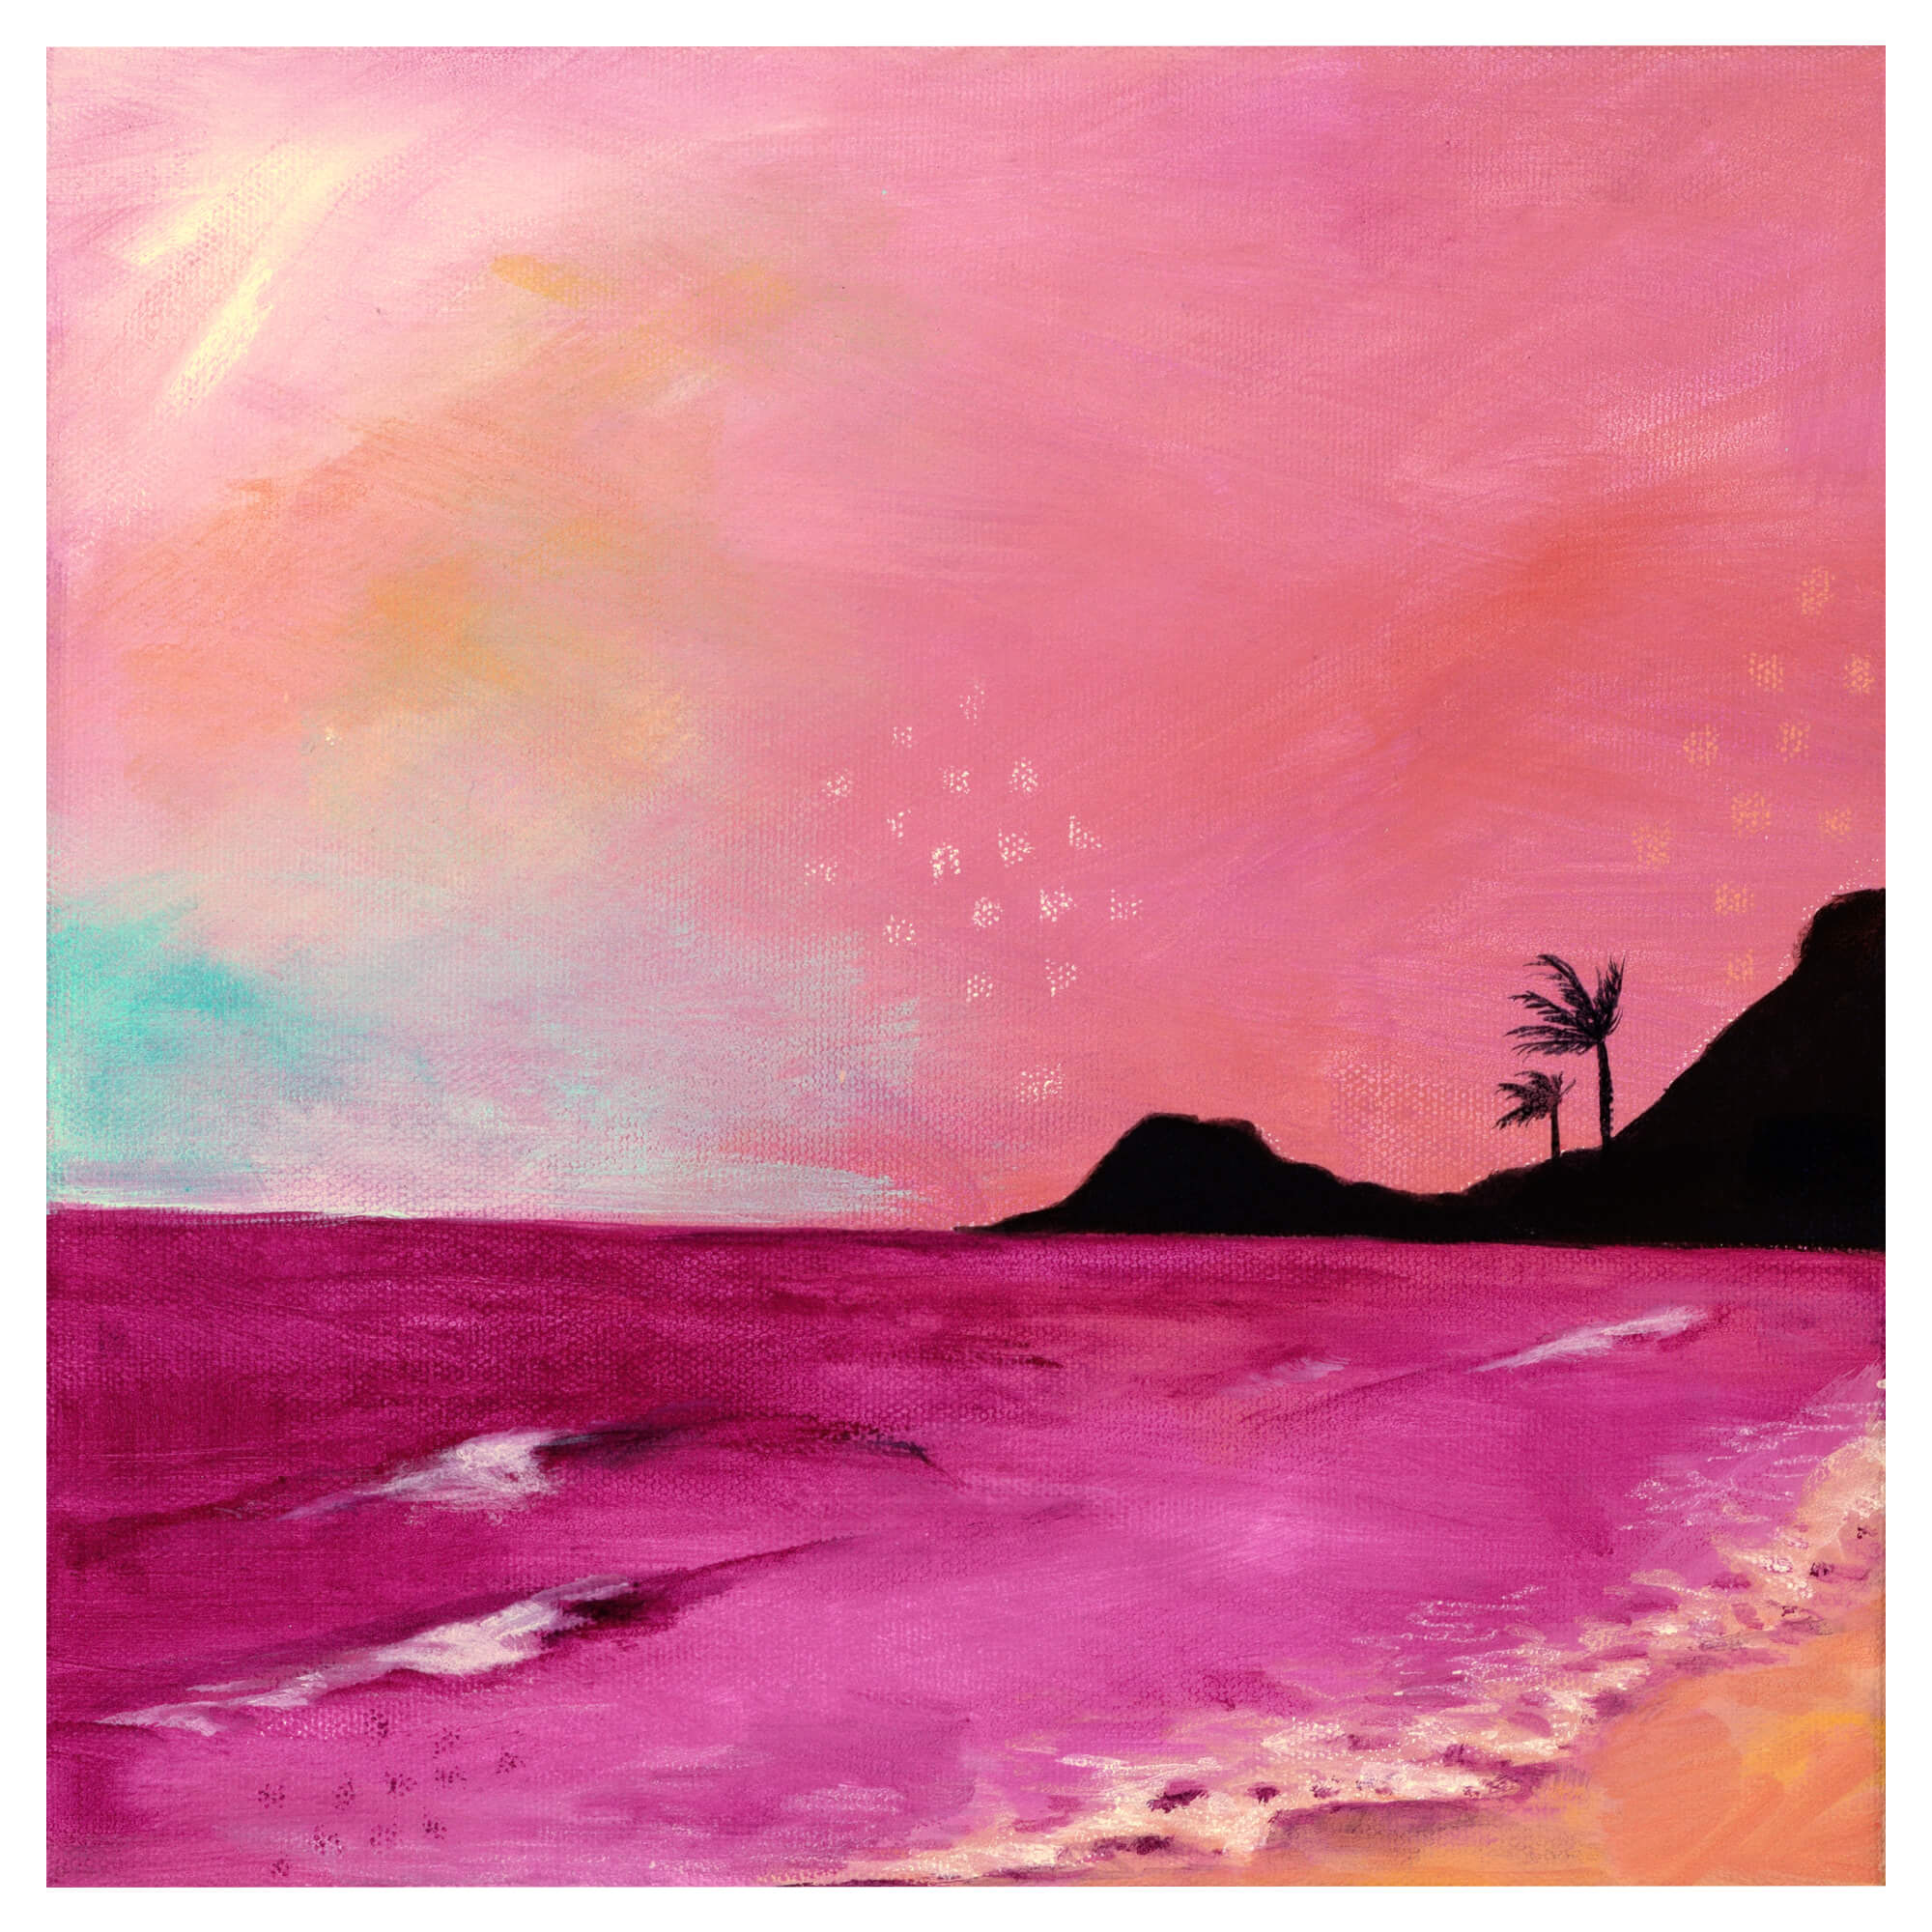 A distant island with coconut trees in a pink-colored seascape by Hawaii artist Lindsay Wilkins